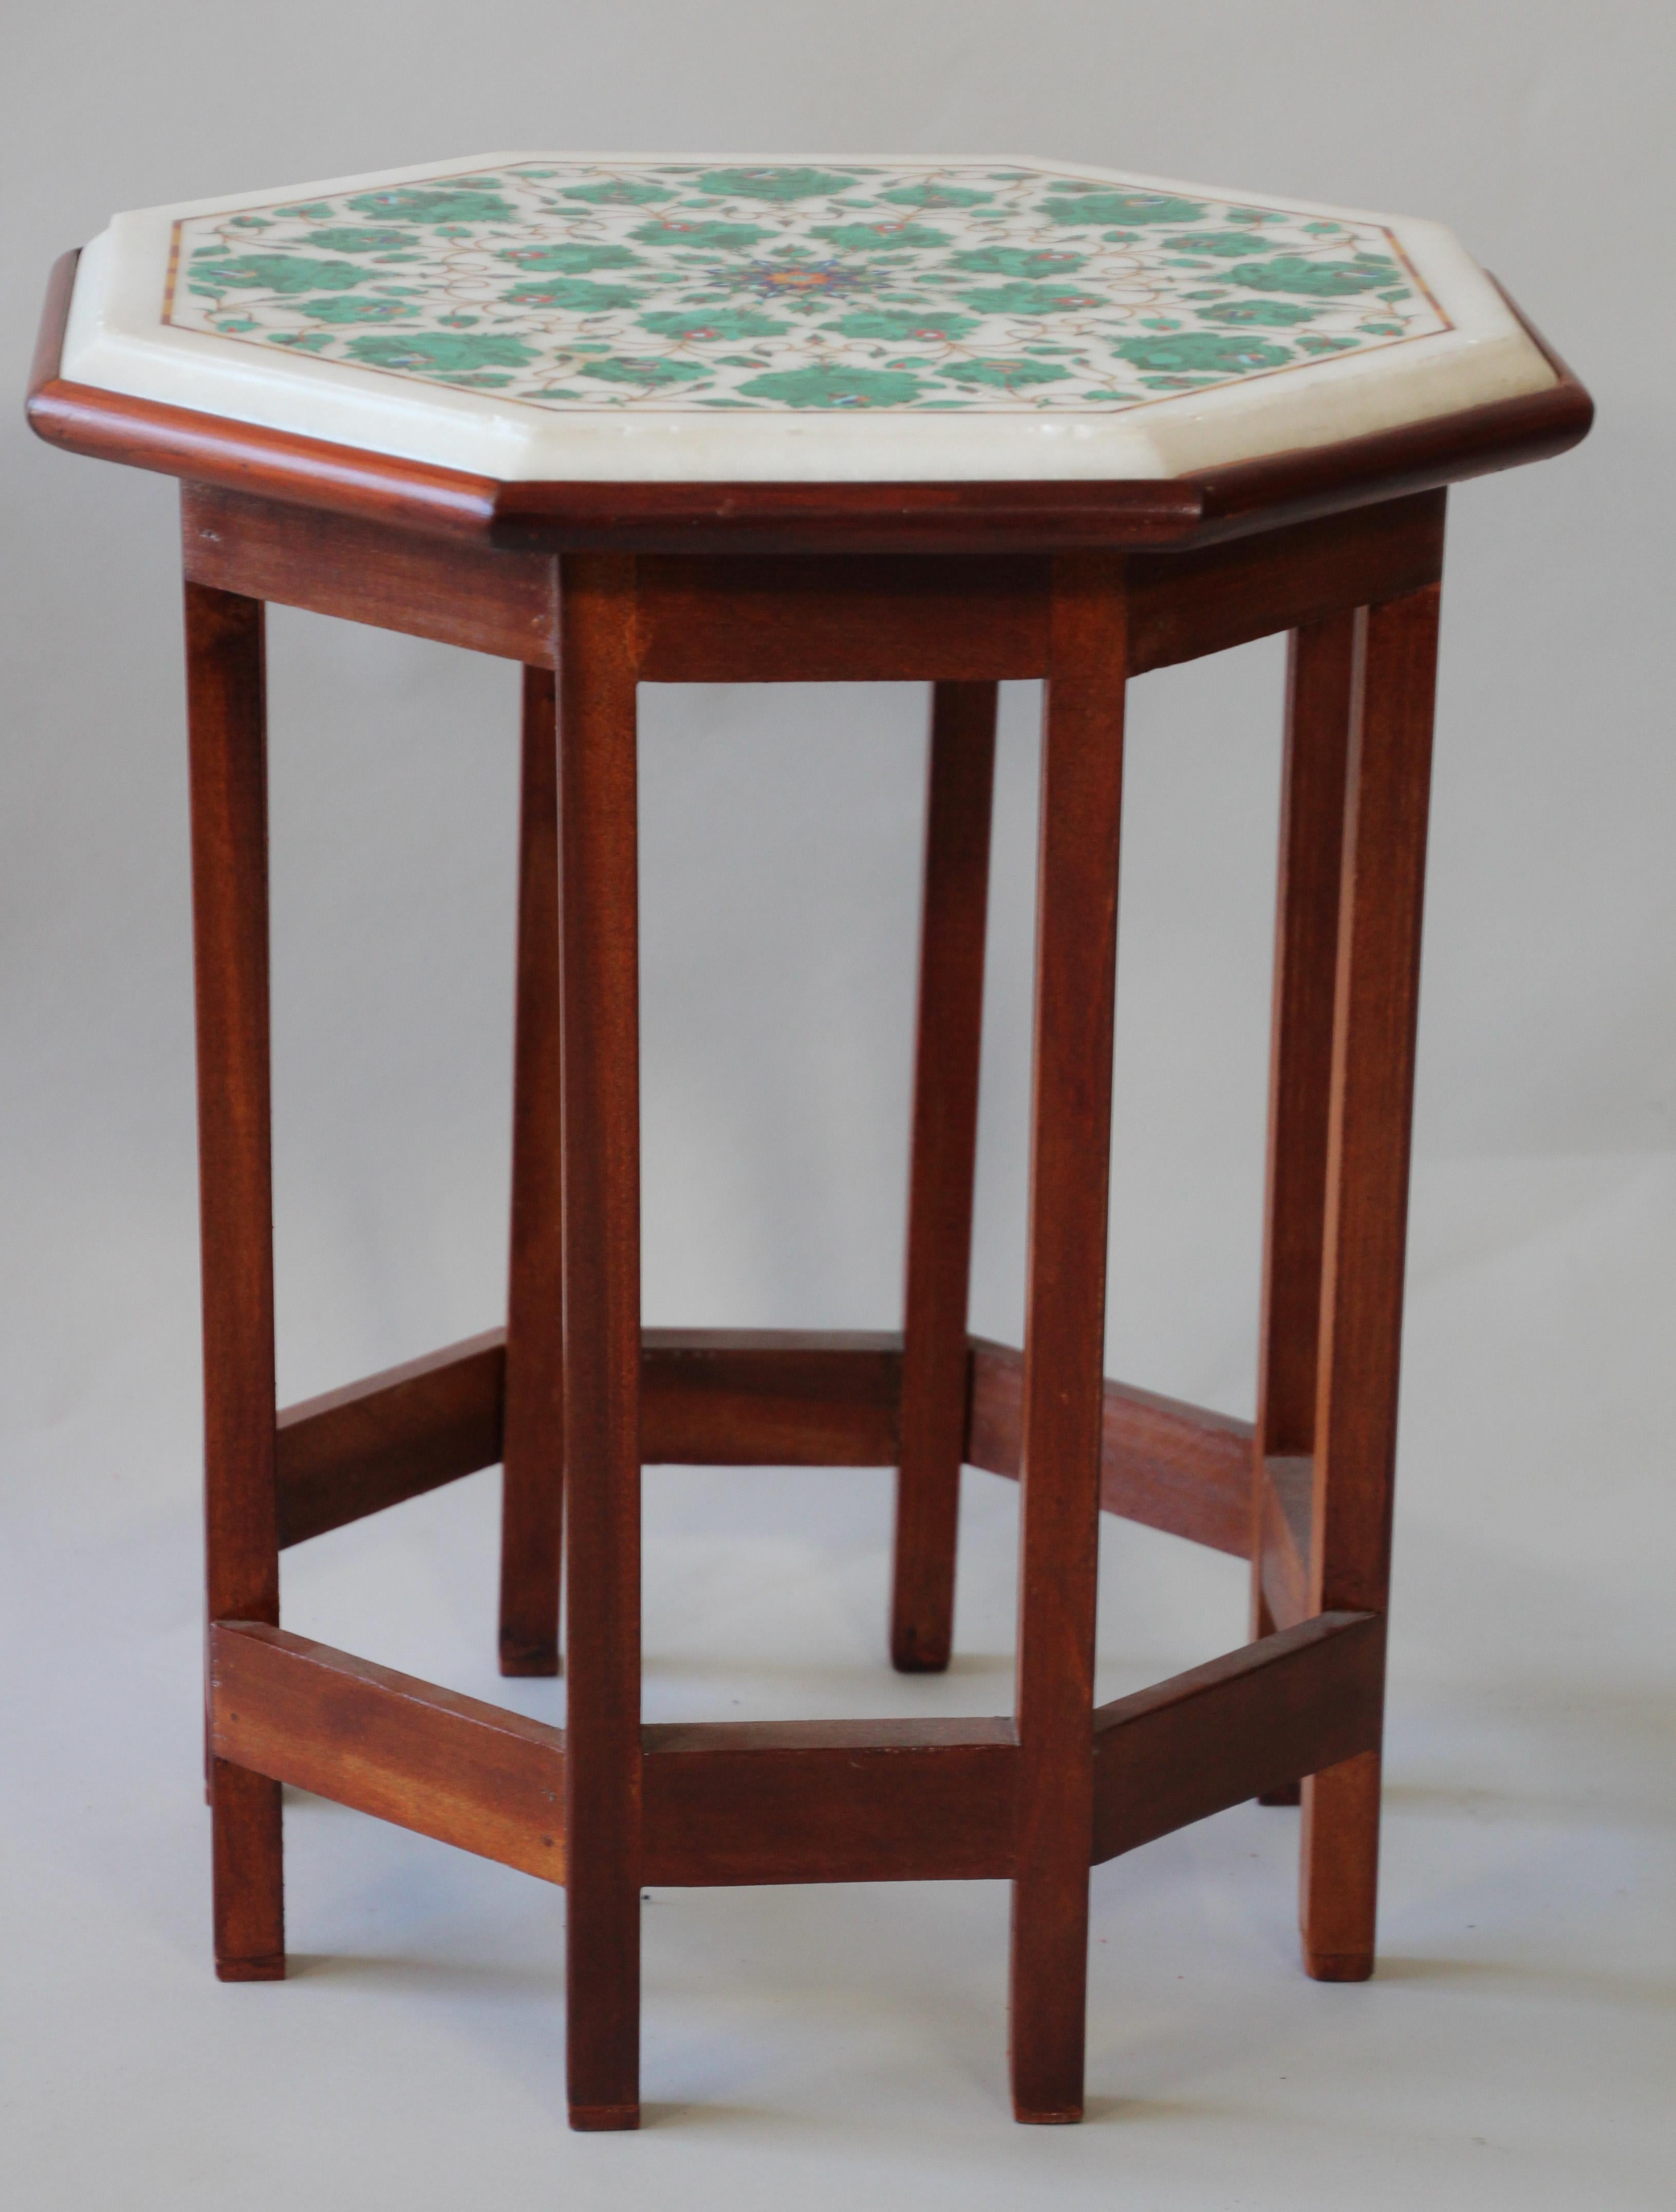 Pietra Dura Marble-Topped Octagonal Table Inlaid in Taj Mahal Anglo Raj Style 10